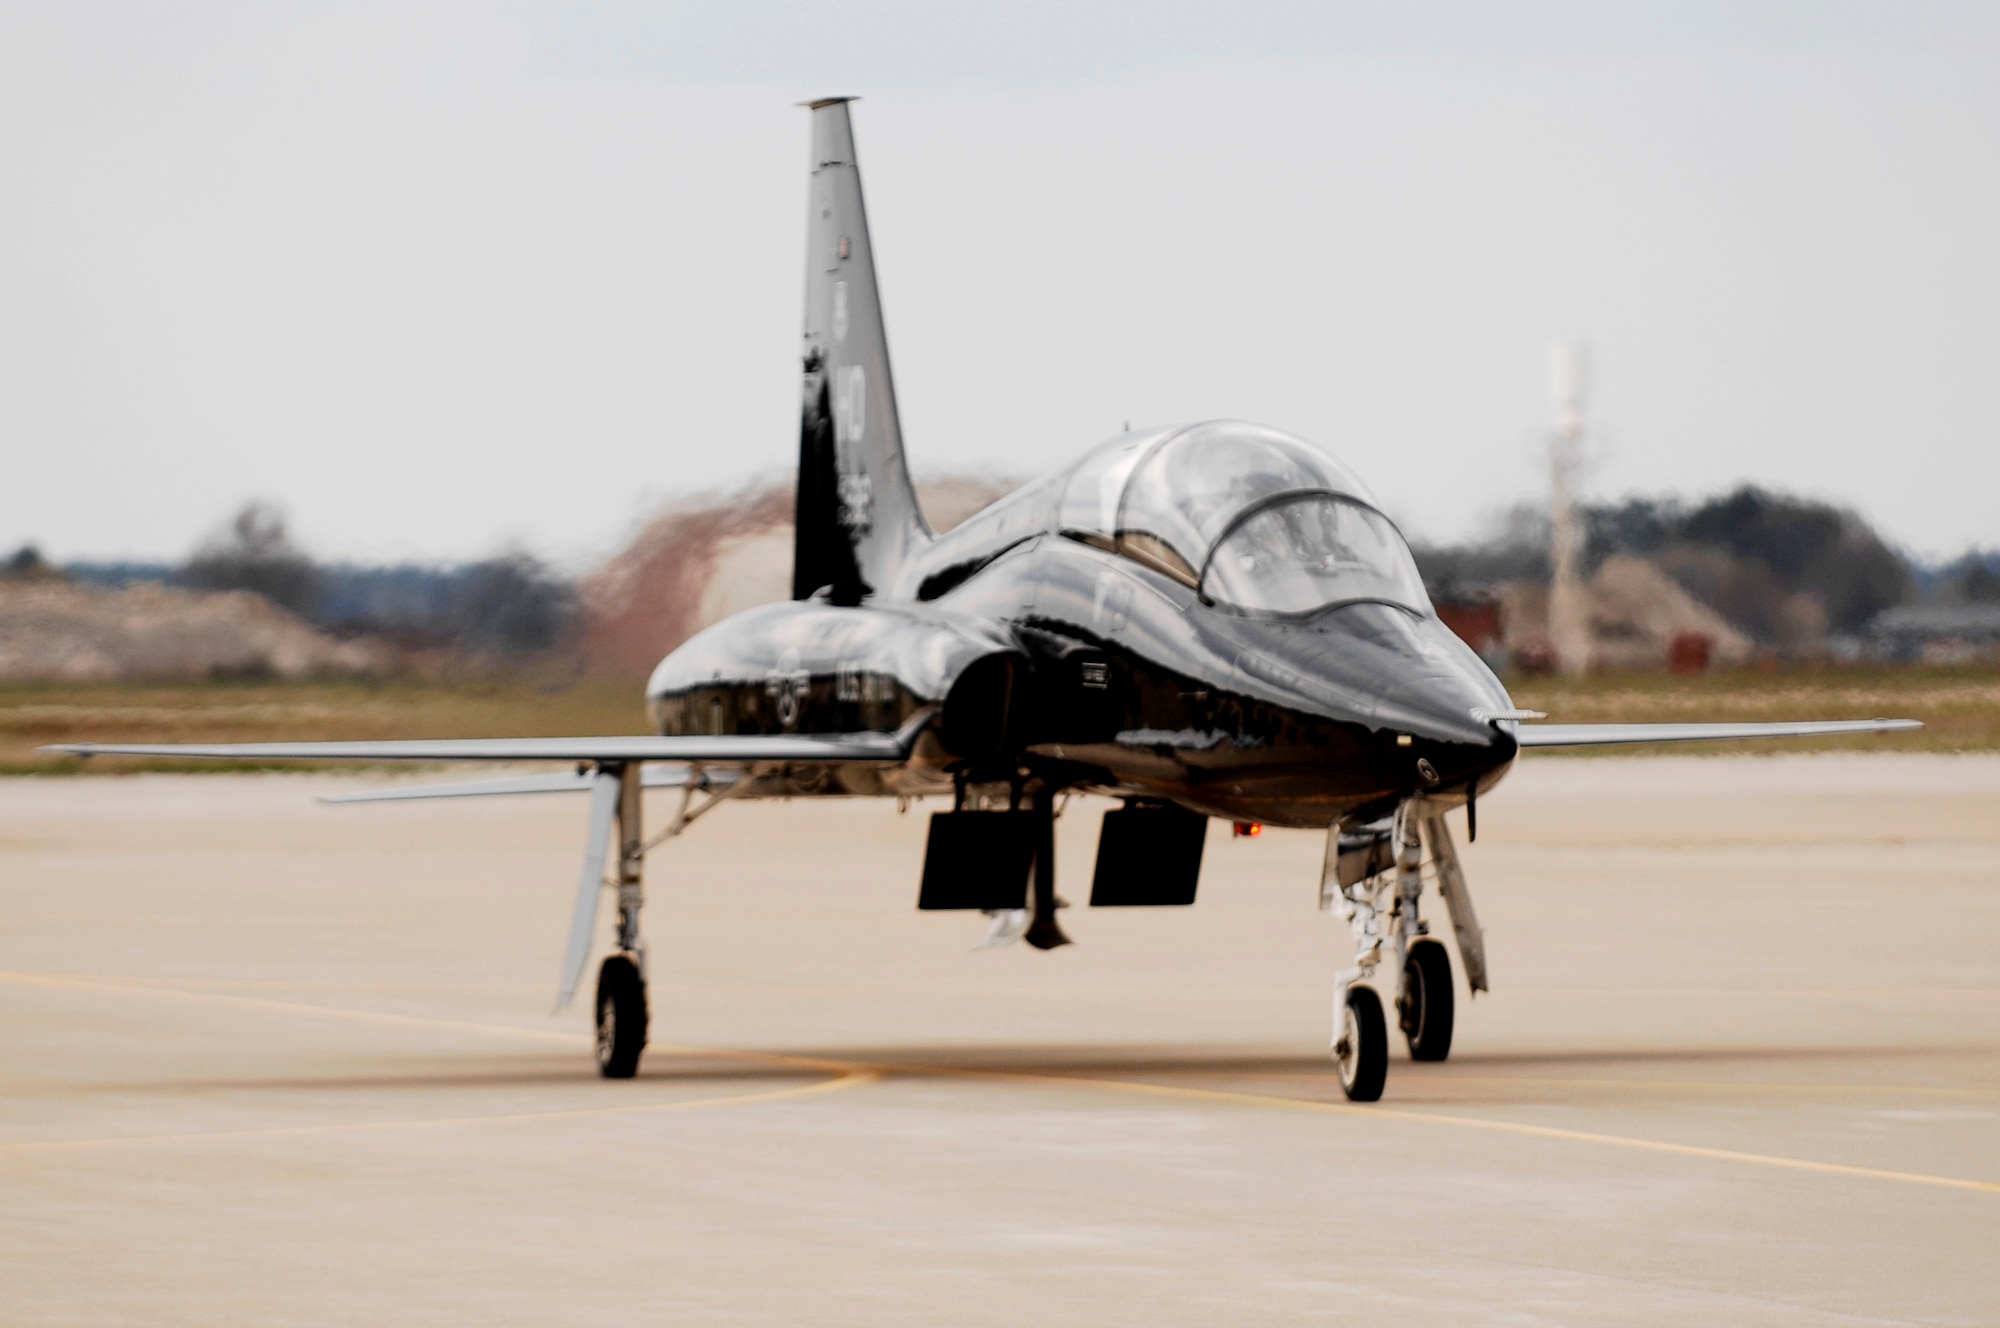 The T-38 Talon arrives at Base Ops at Langley Air Force Base, Va., April 1, 2011. The T-38 Talon is one of seven coming to Langley AFB to support F-22 Raptor Combat Readiness Training. (U.S. Air Force photo by Airman 1st Class Kayla Newman/Released)